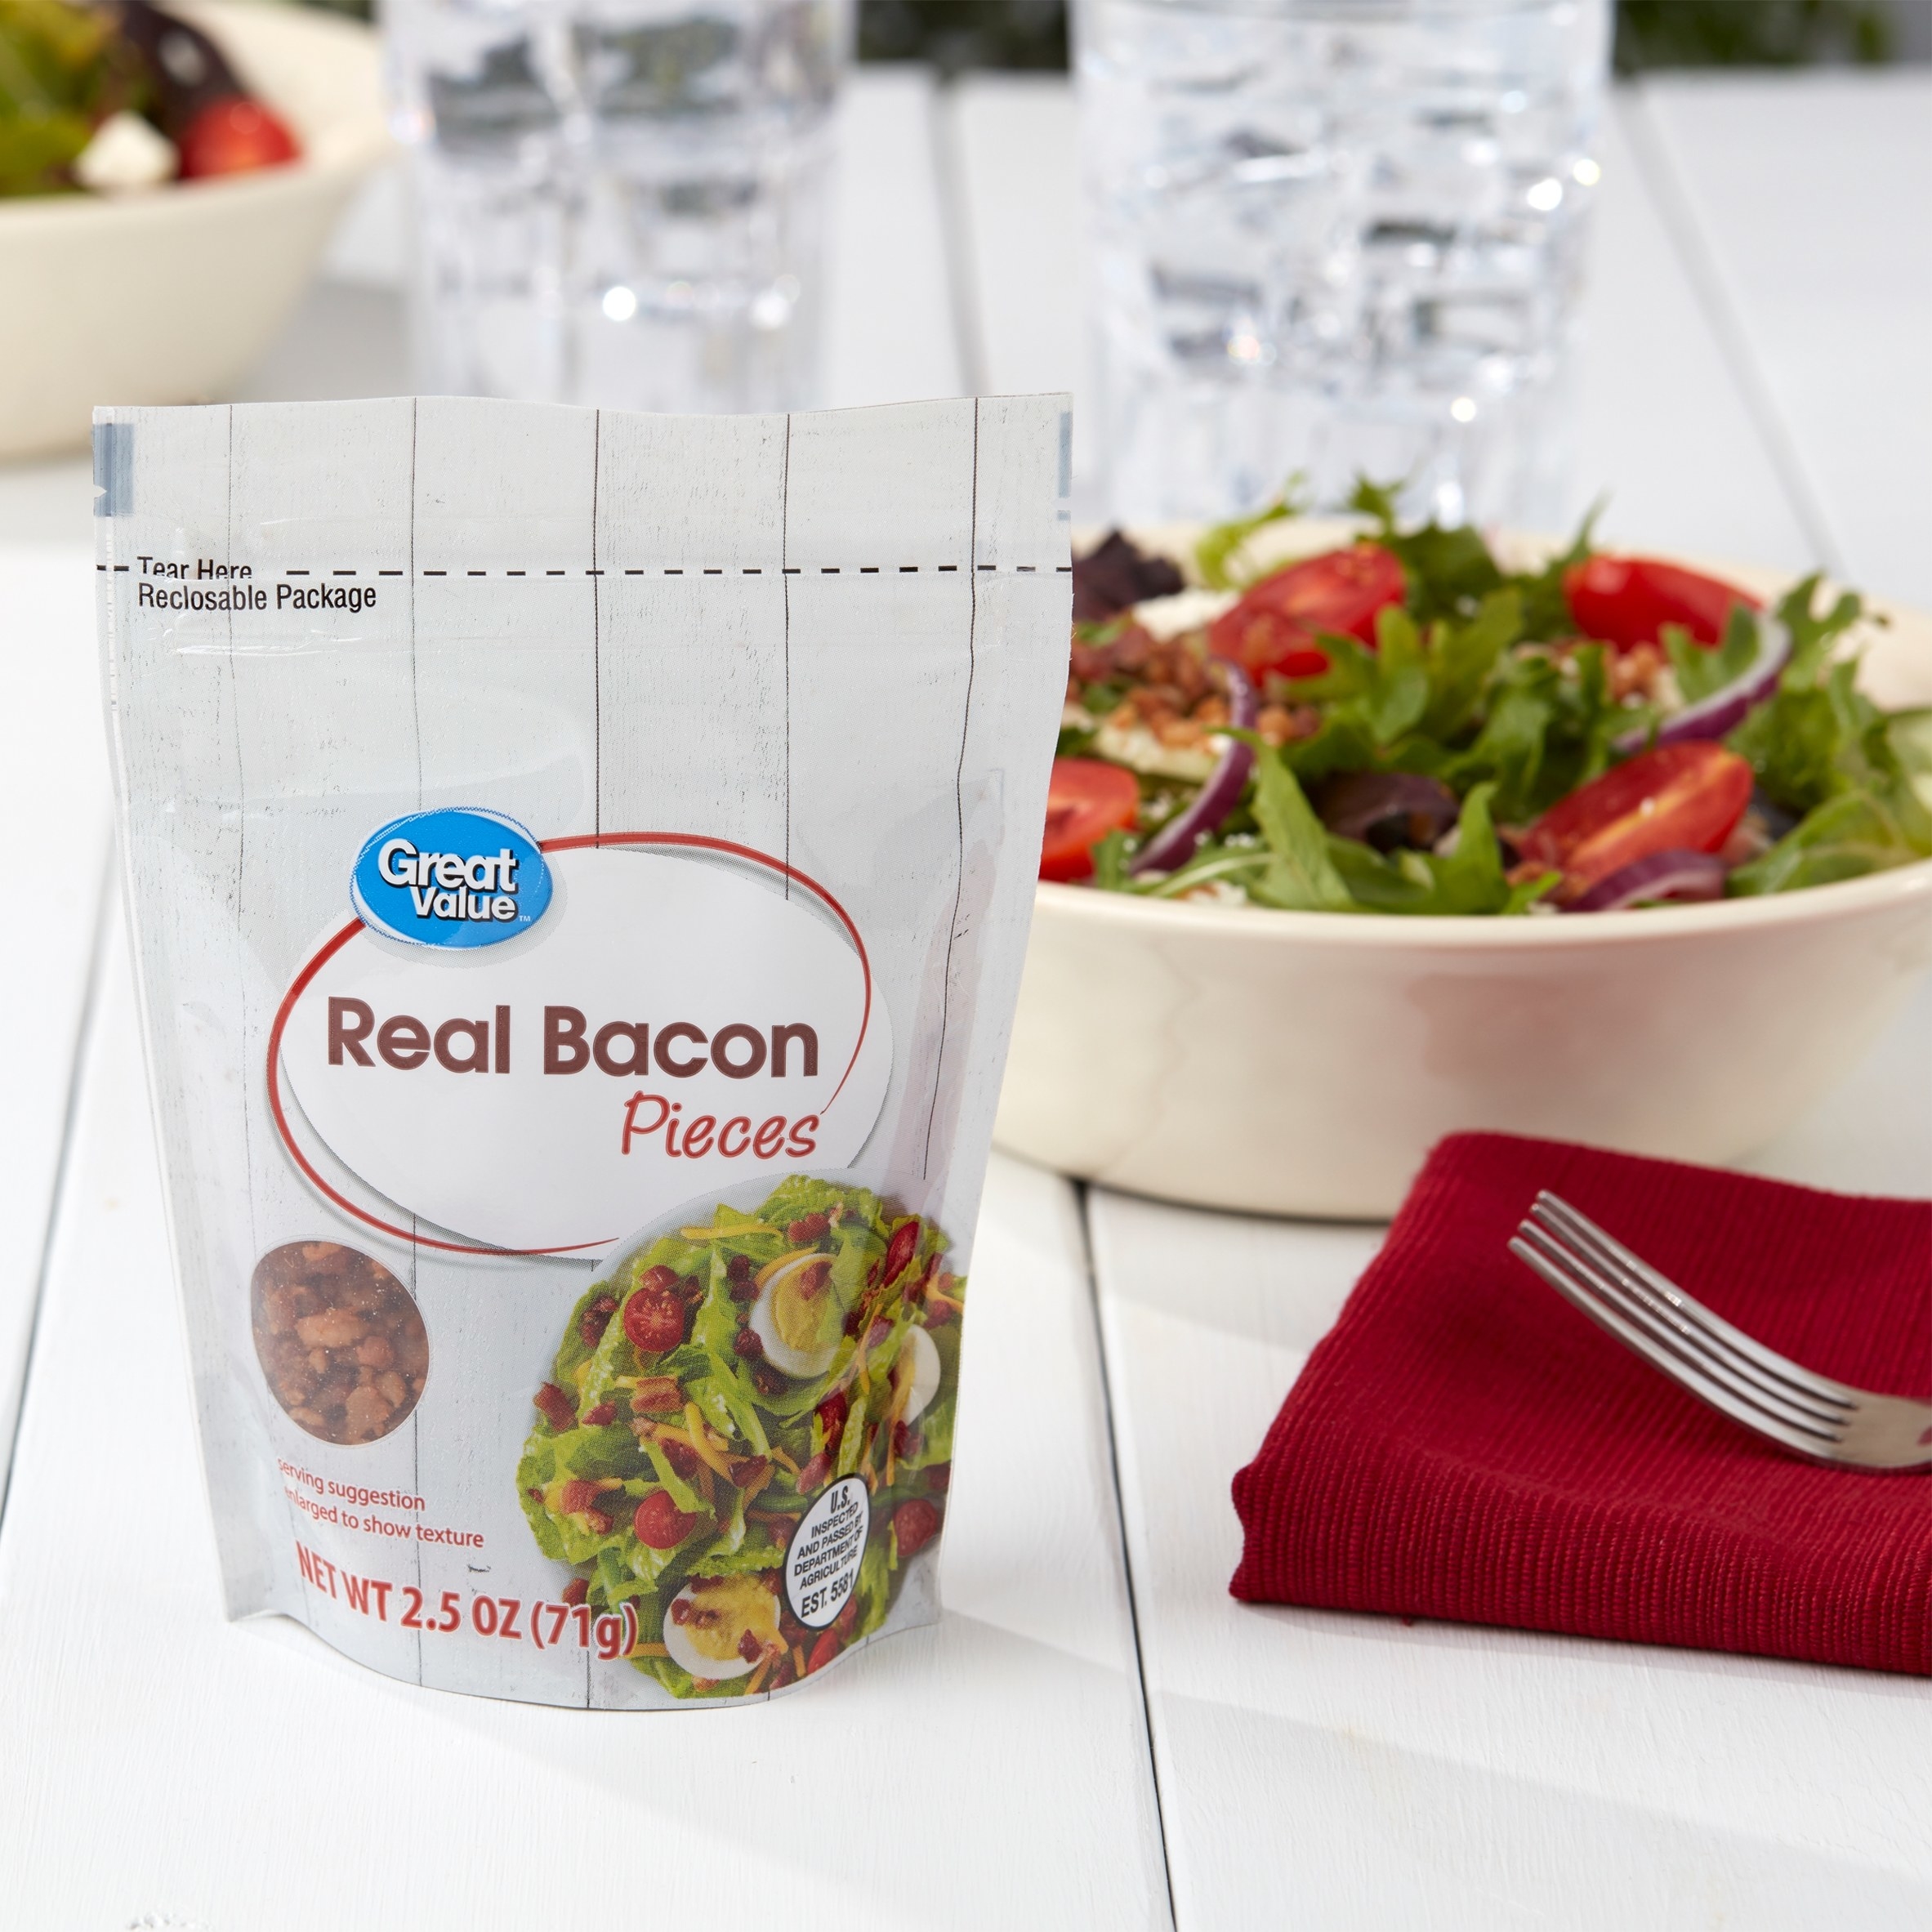 Pack of bacon pieces on a table next to a salad, napkin, and fork